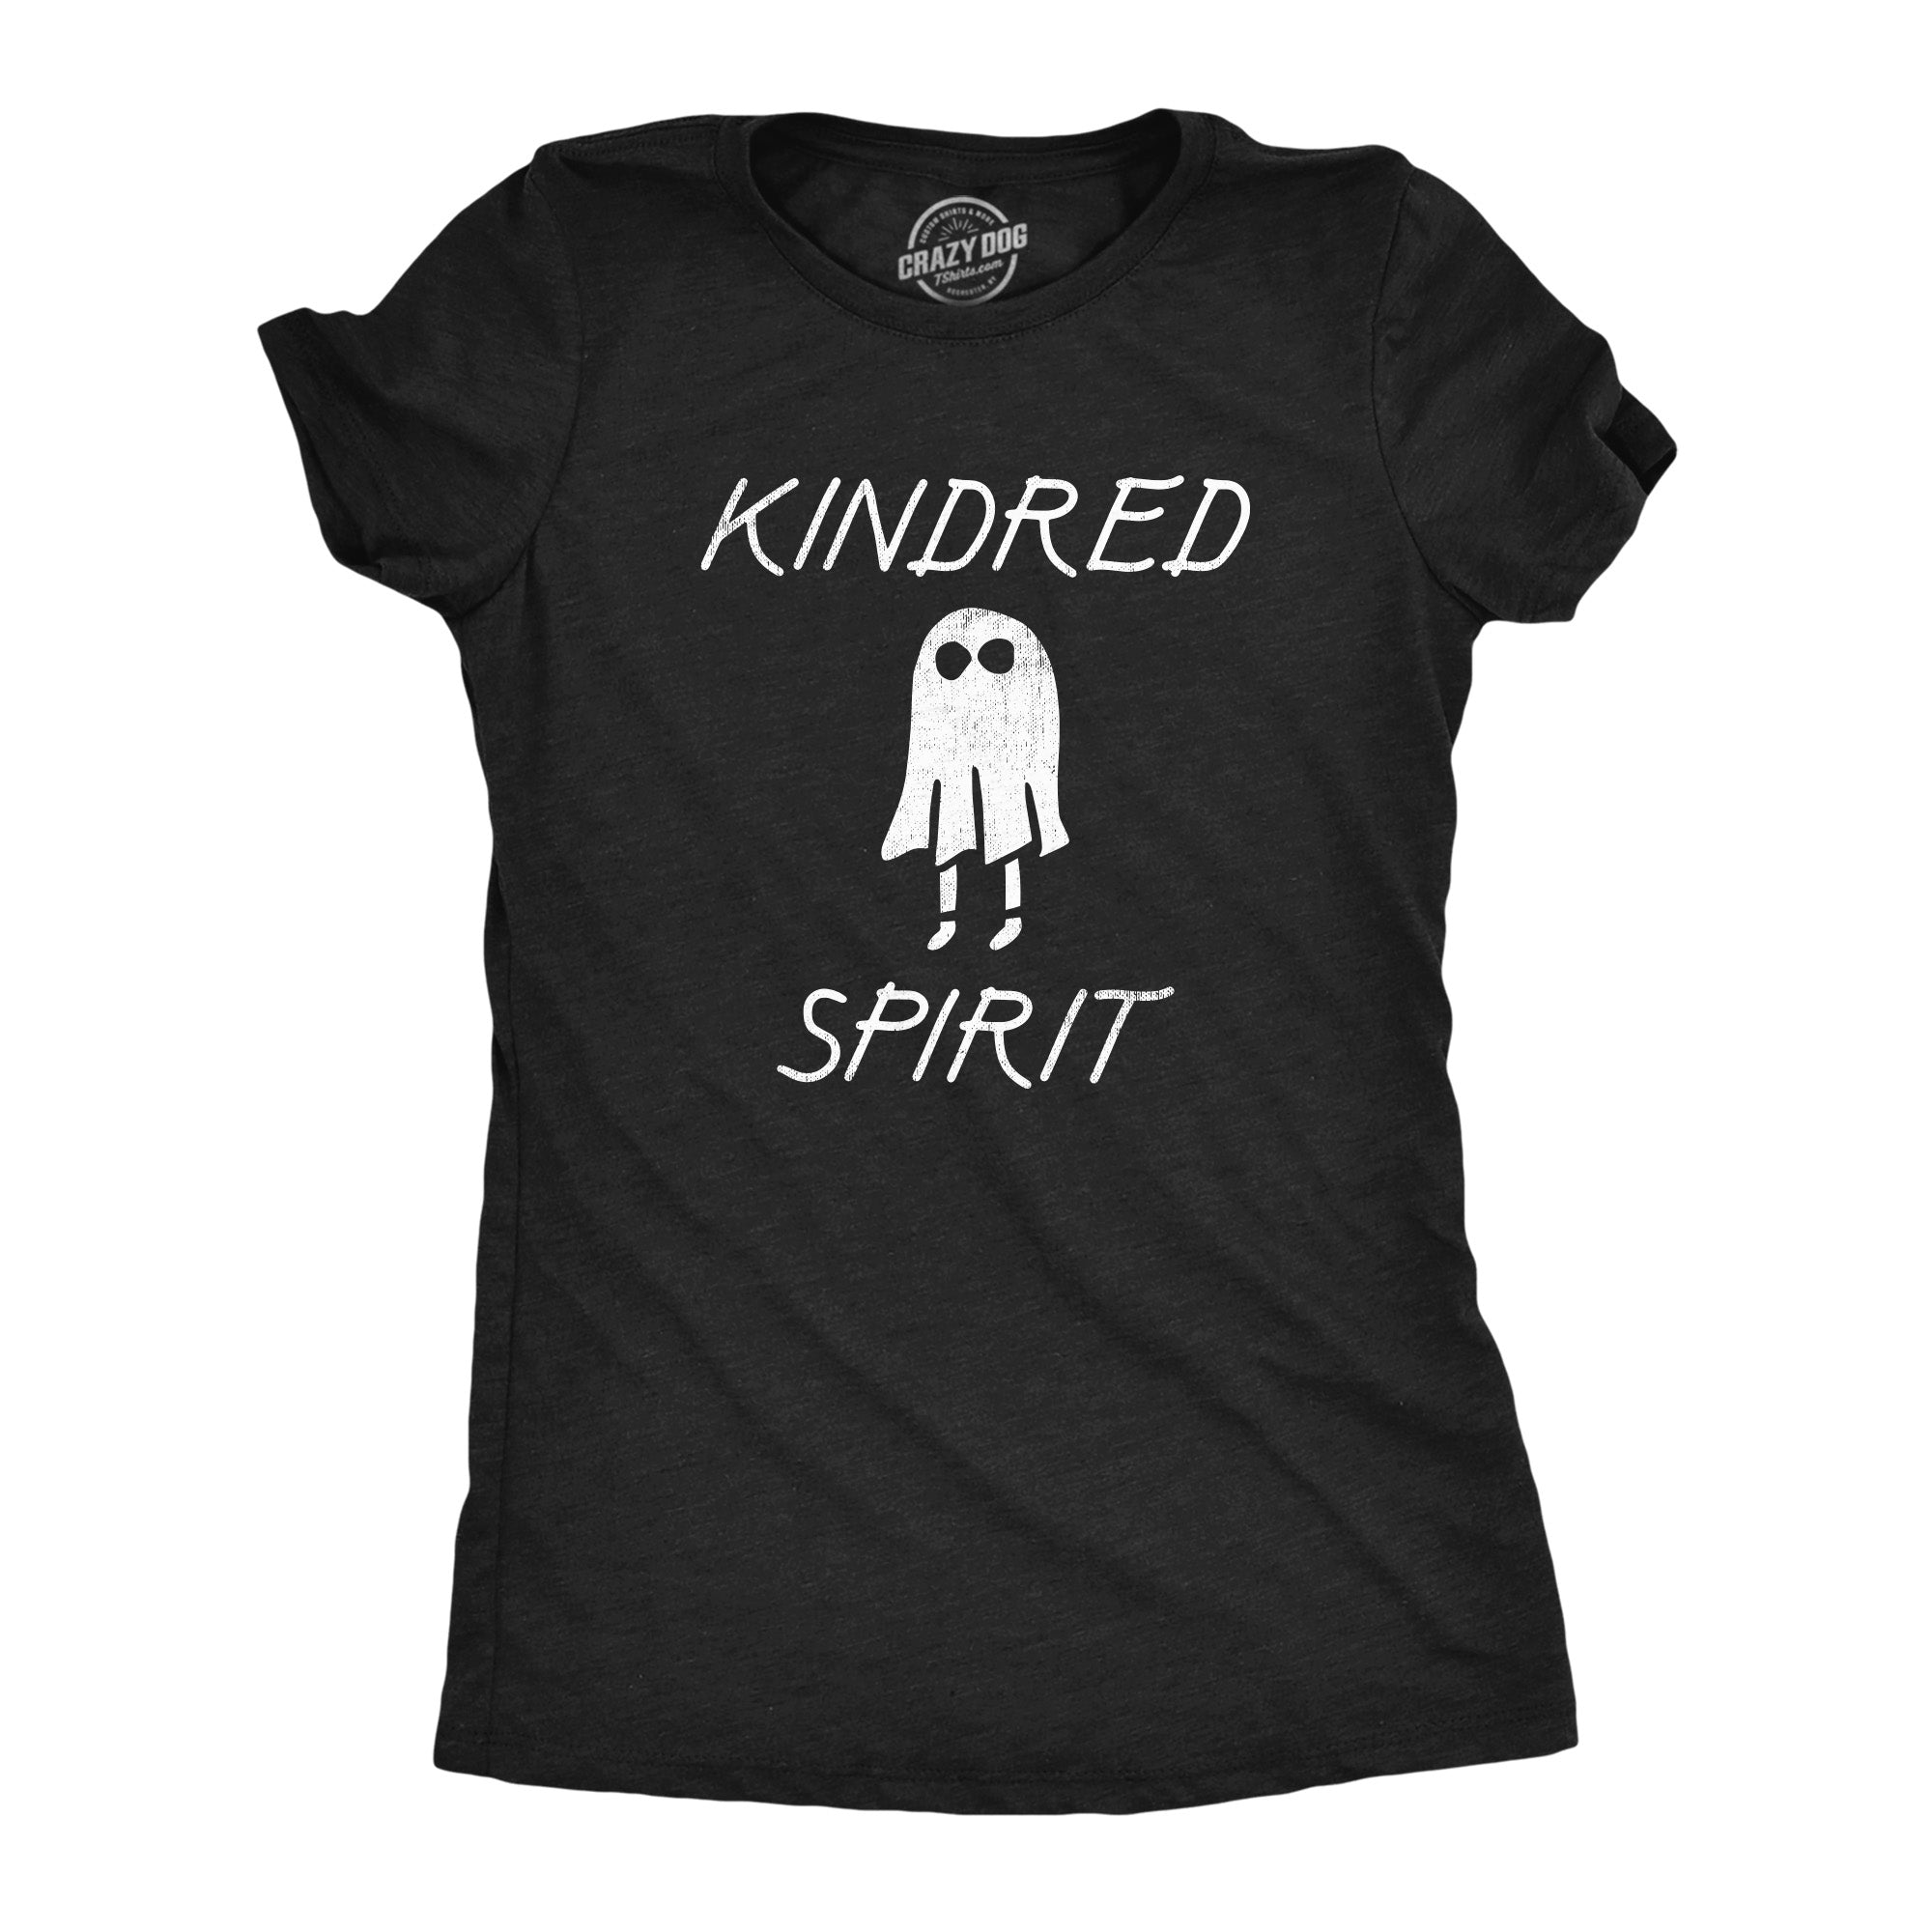 Funny Heather Black - KINDRED Kindred Spirit Womens T Shirt Nerdy Halloween Sarcastic Tee